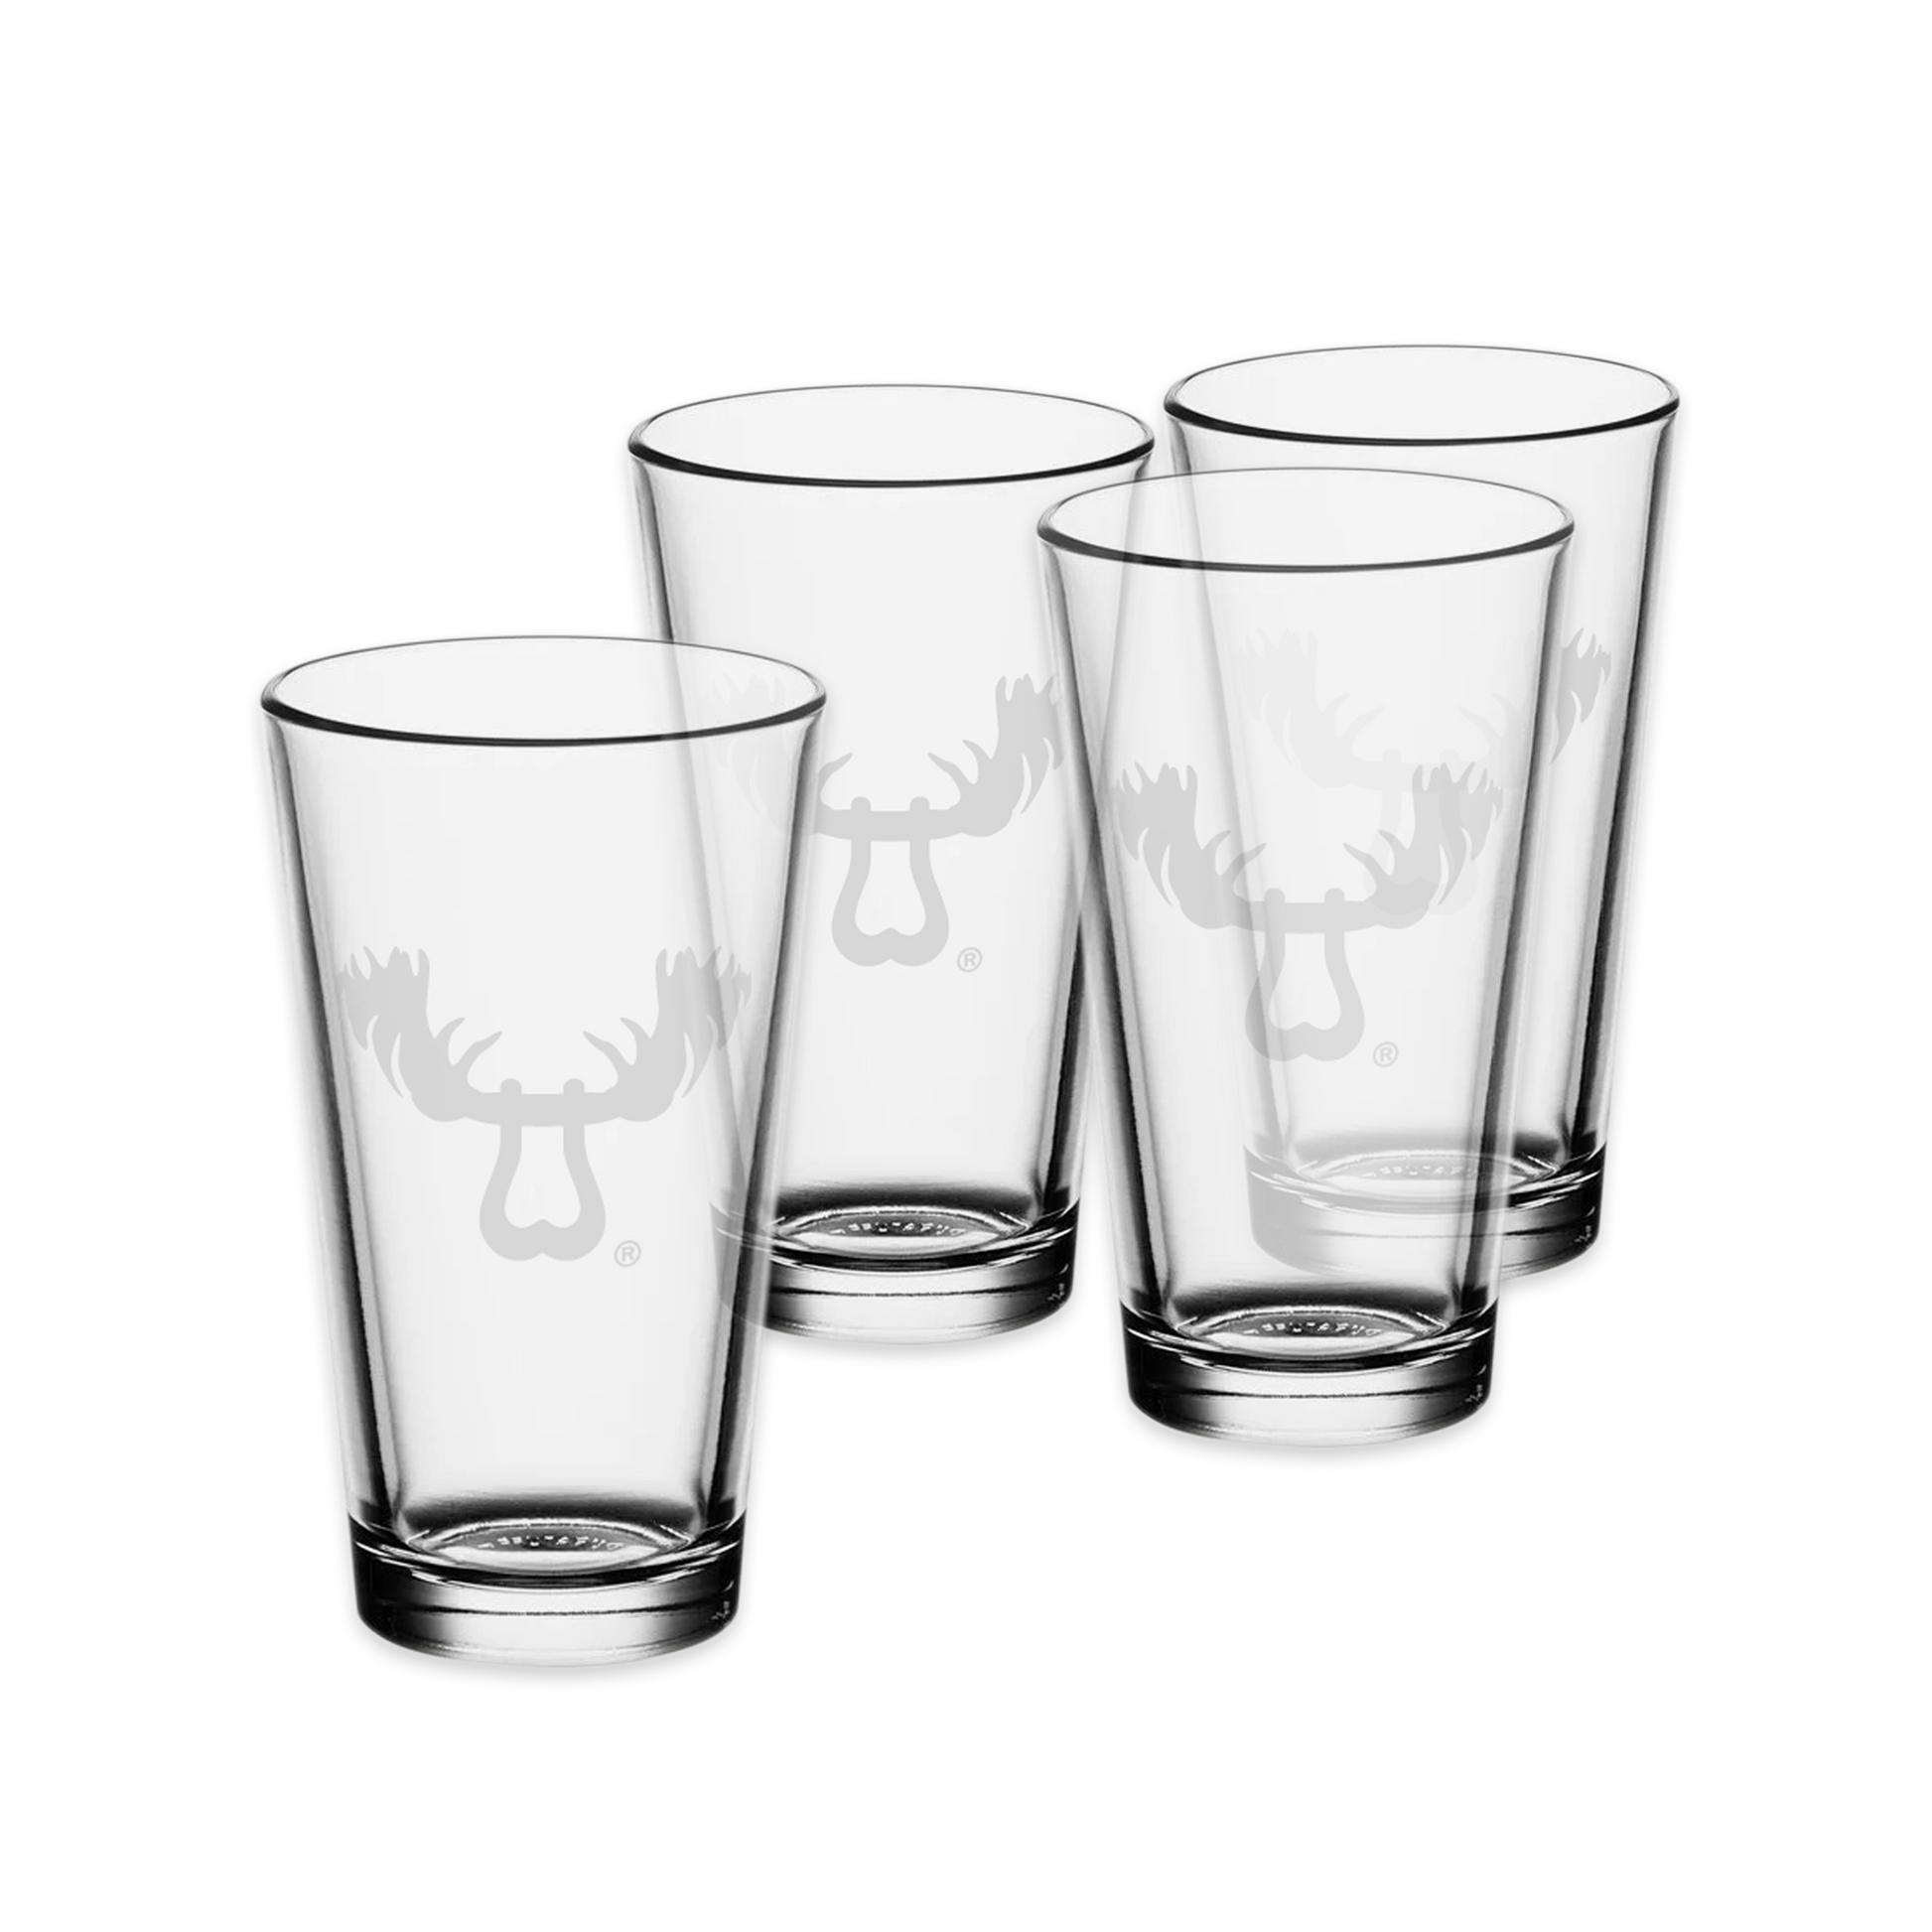 Moose Knuckle Offroad 16oz pint glass four pack offroad recovery geargear